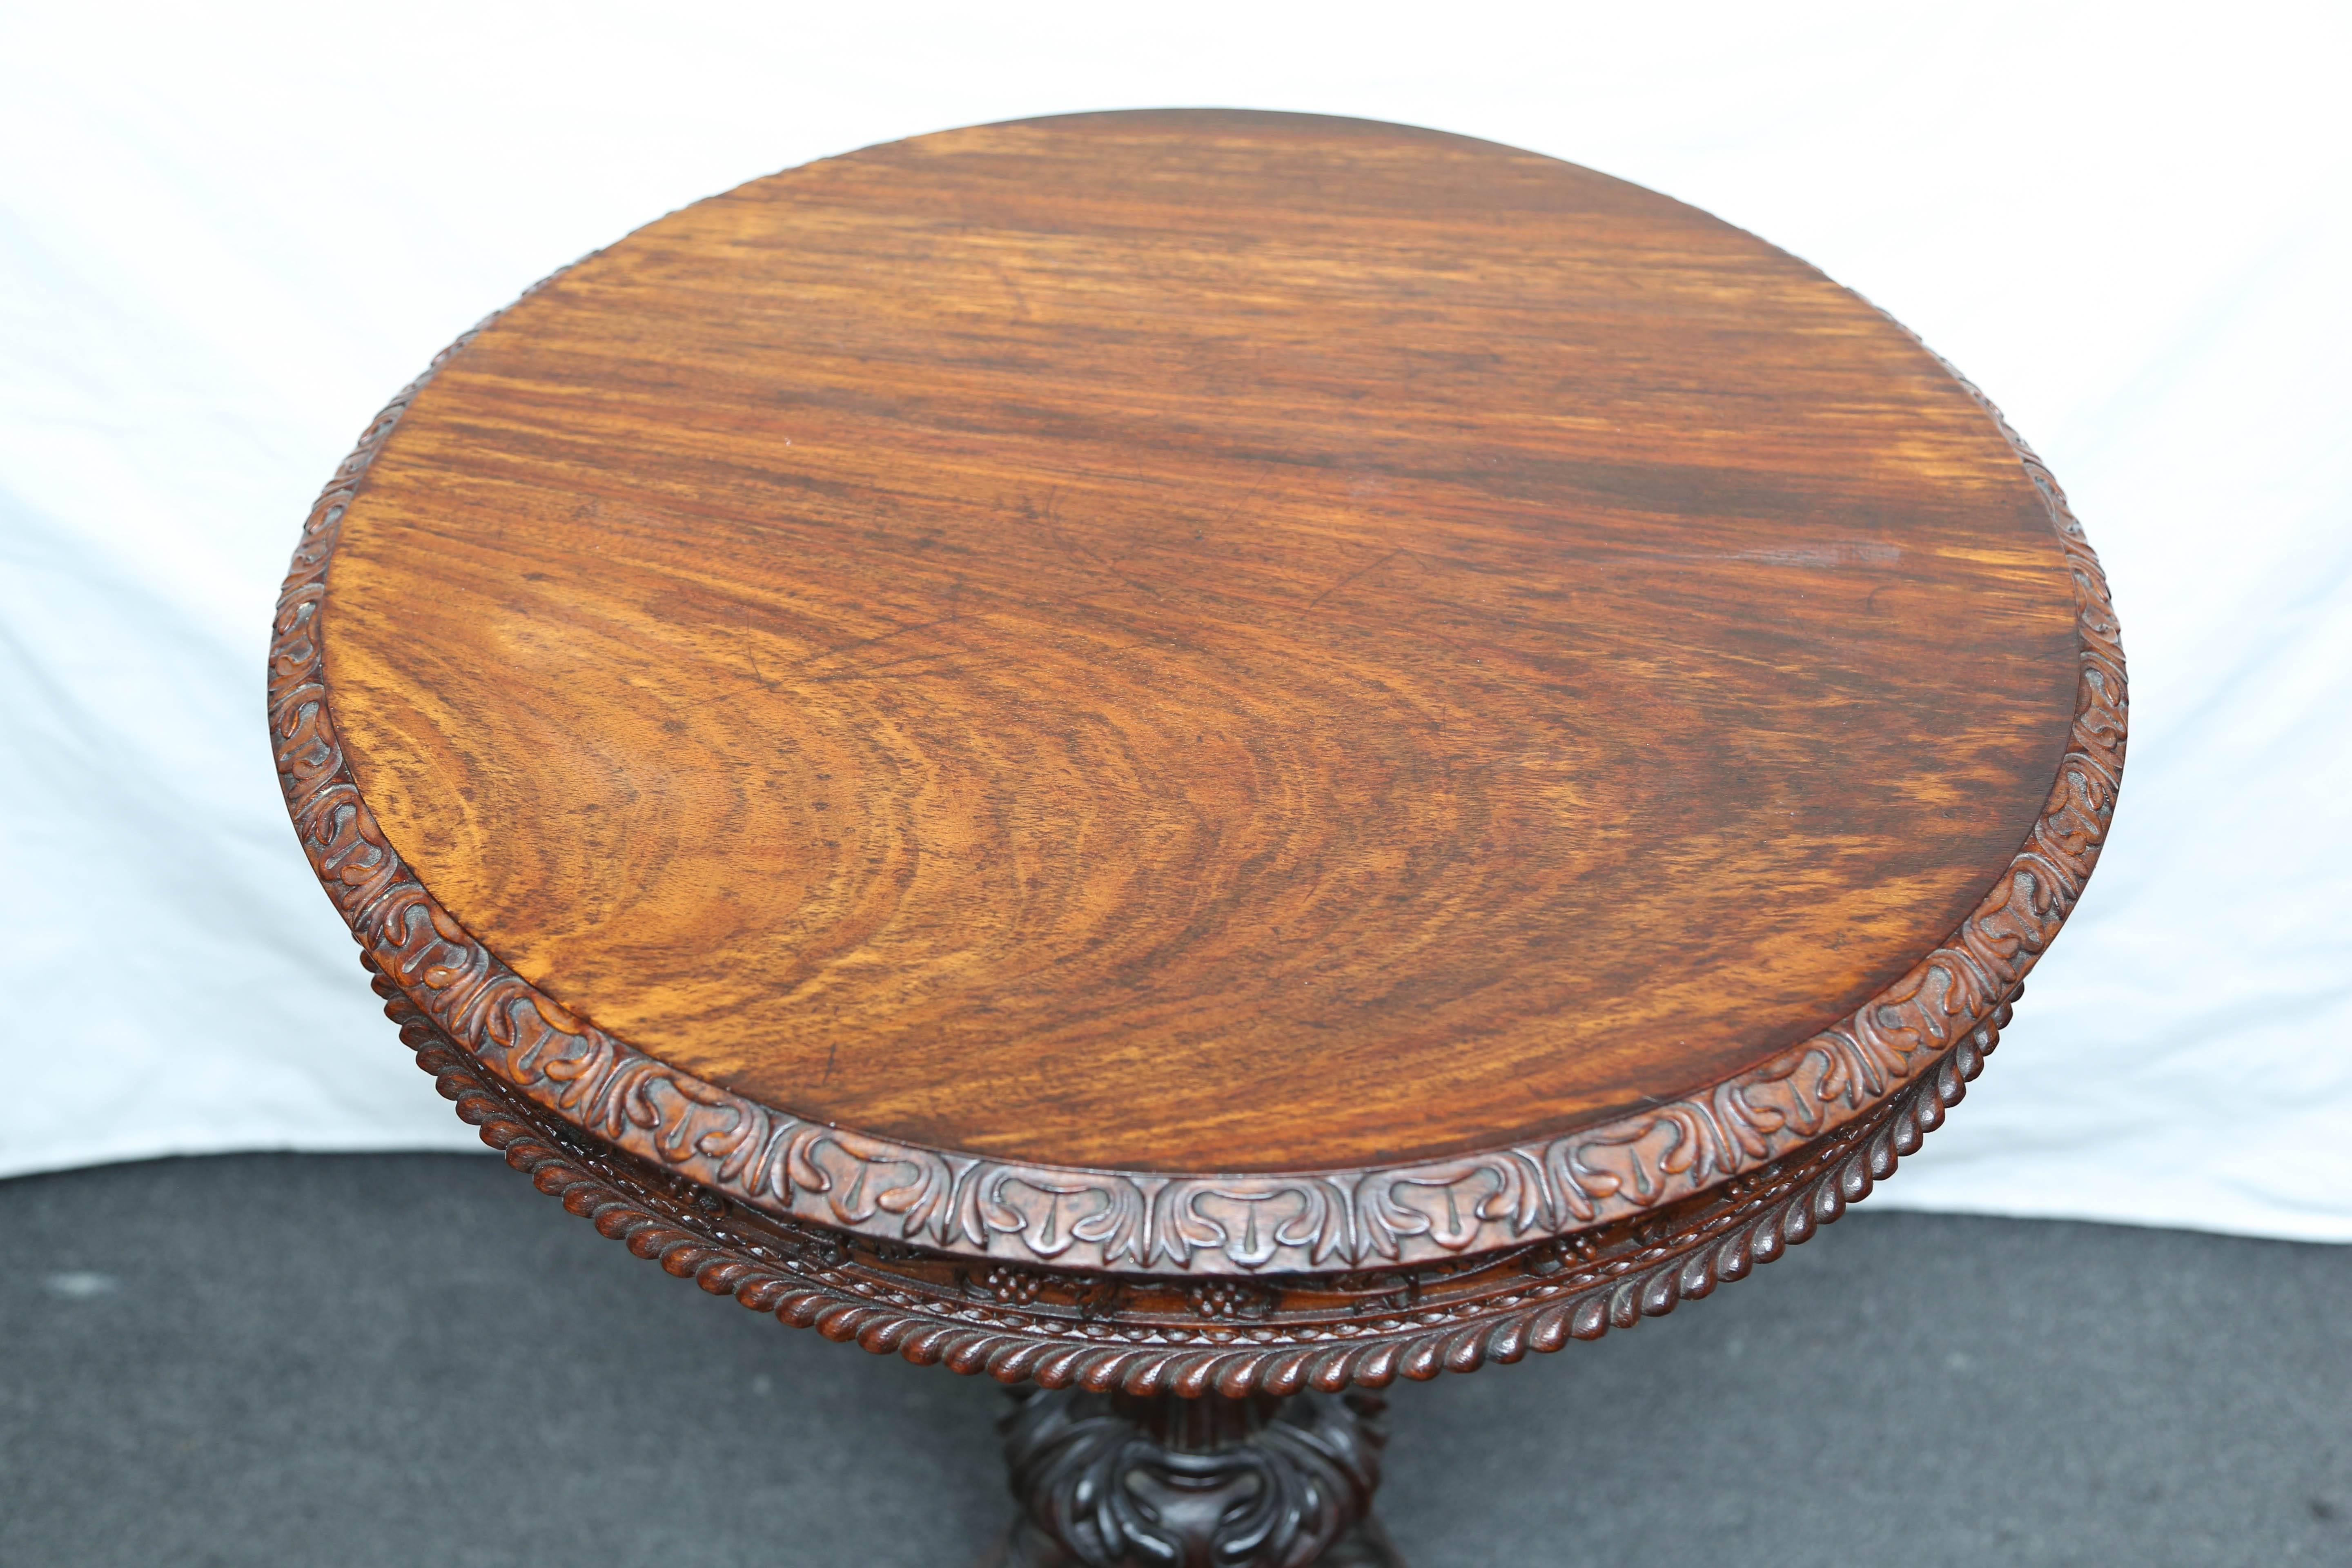 Rare and stunning rosewood table, original patination and color. Elaborate carving with vine and foliage apron. An exquisite example.